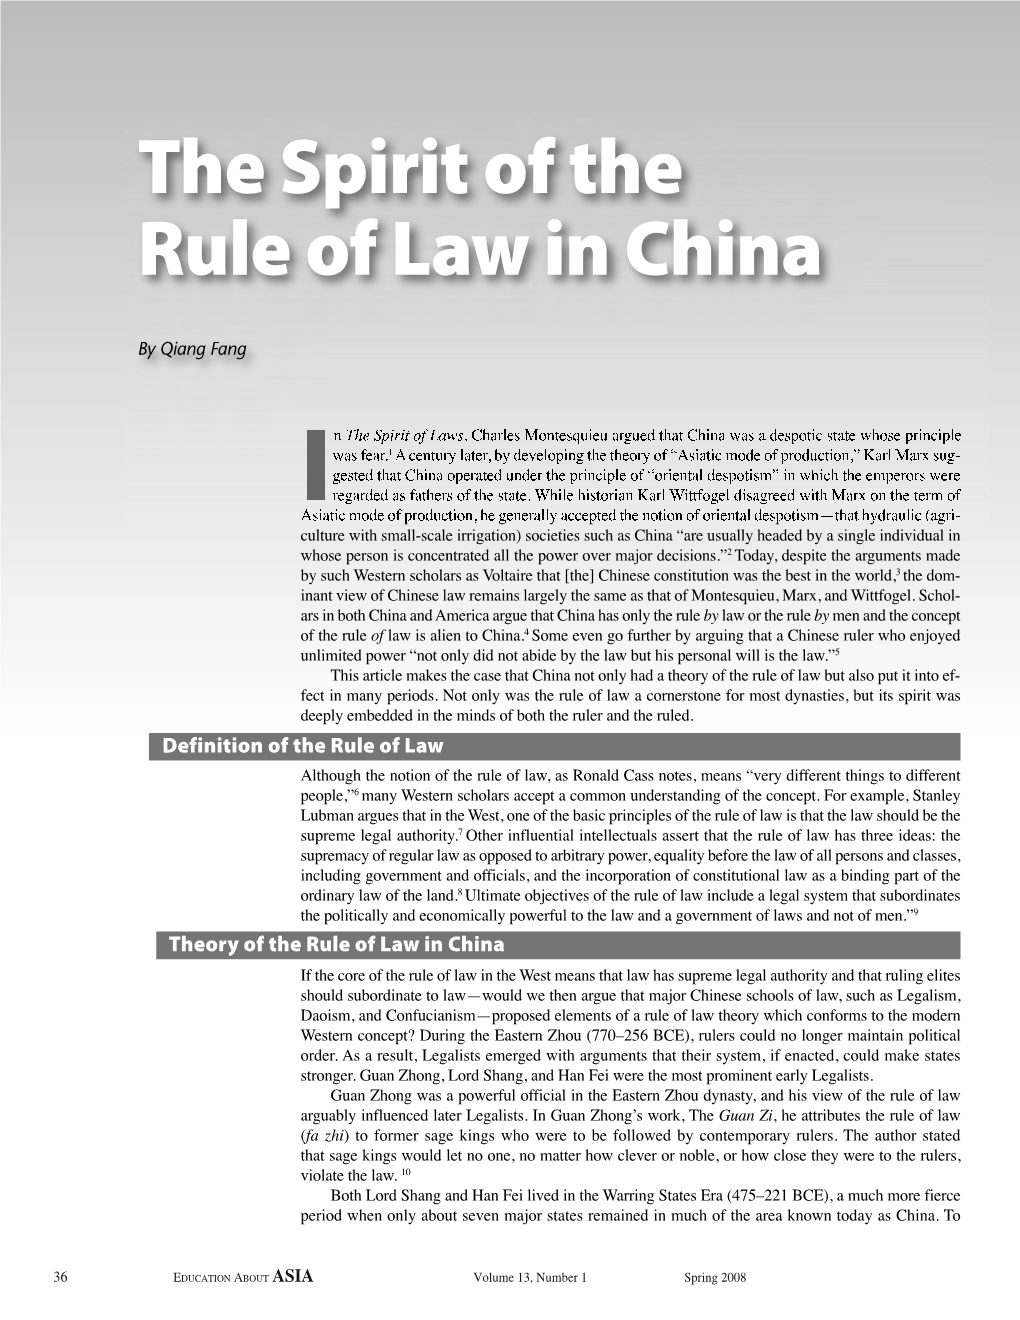 The Spirit of the Rule of Law in China